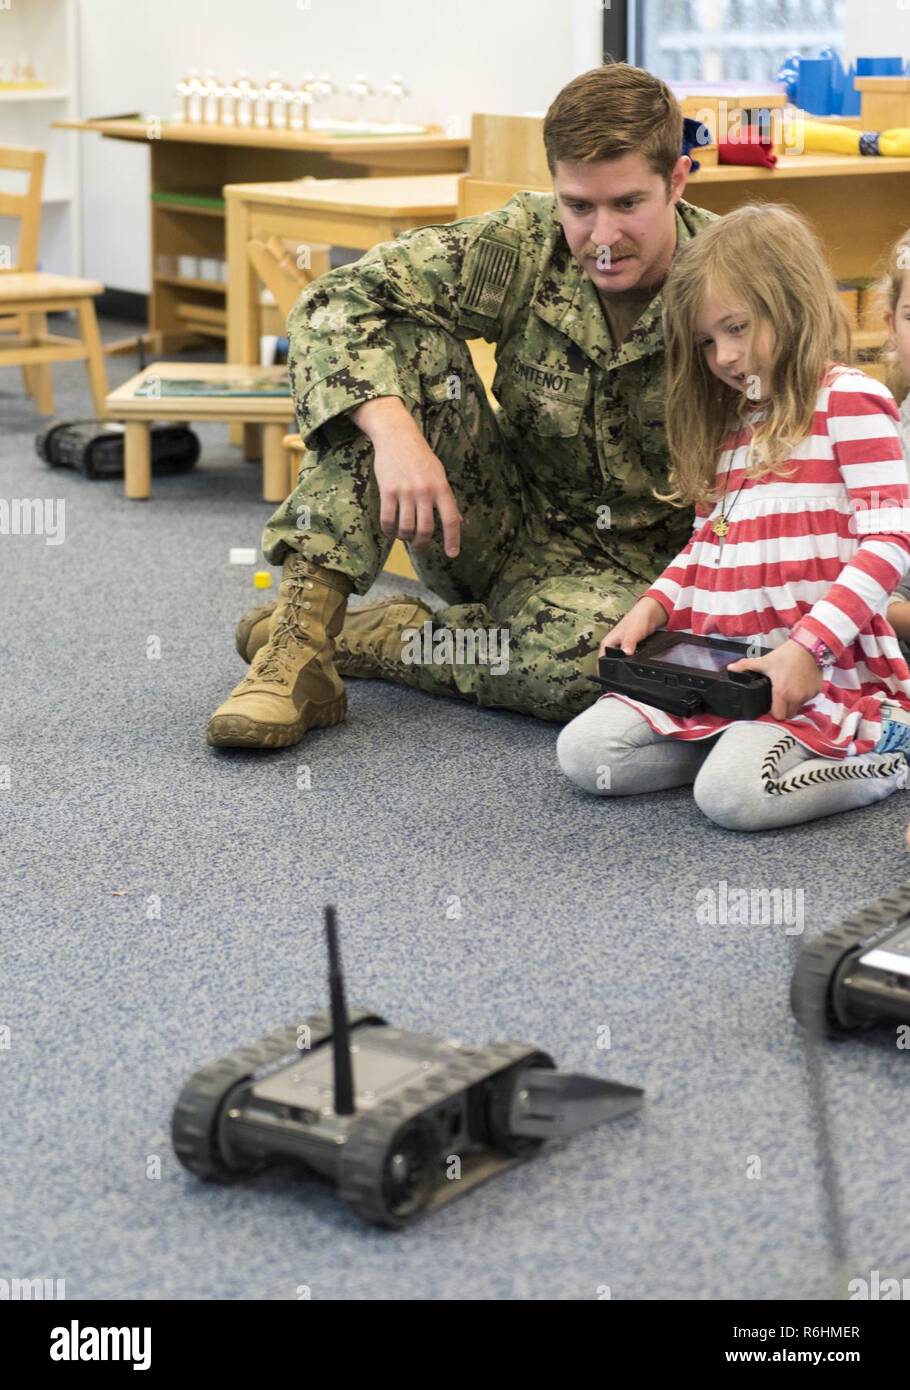 NORFOLK, Va. (May 12, 2017) Explosive Ordnance Disposal Technician 2nd Class Nicholas Fontenot, assigned to Explosive Ordnance Disposal Mobile Unit (EODMU) 12, shows a student how to drive a Small Unmanned Ground Vehicle (SUGV) during a community relations event at McDonald Montessori School in Norfolk, Va. EODMU 12 provides credible, combat-ready EOD forces capable of deploying anywhere, anytime in support of national interests. Stock Photo